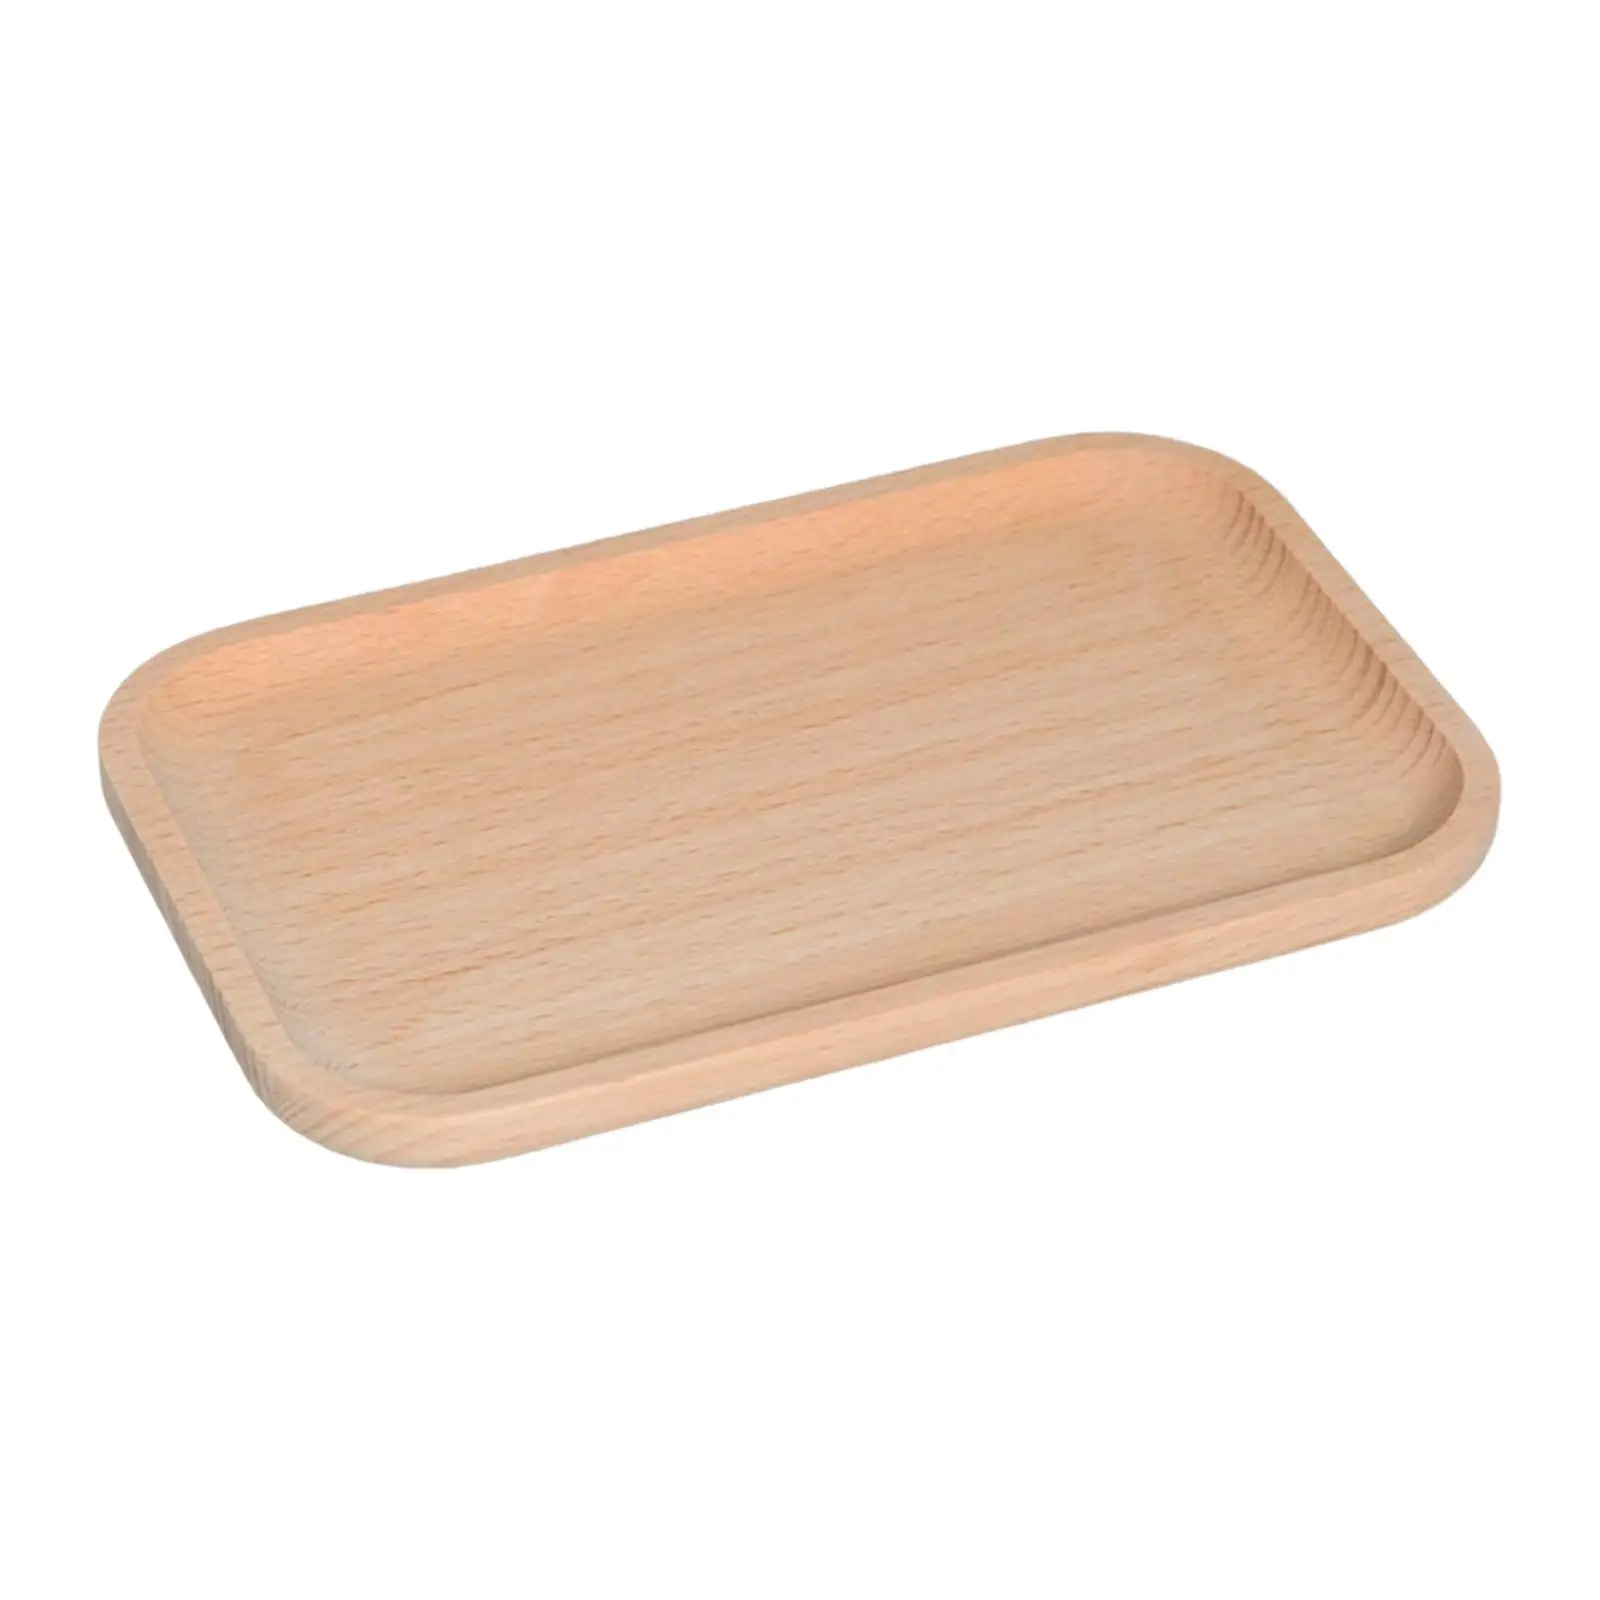 Modern Rectangular Wooden Serving Tray Cheese Board Japanese Style Tea Tray for